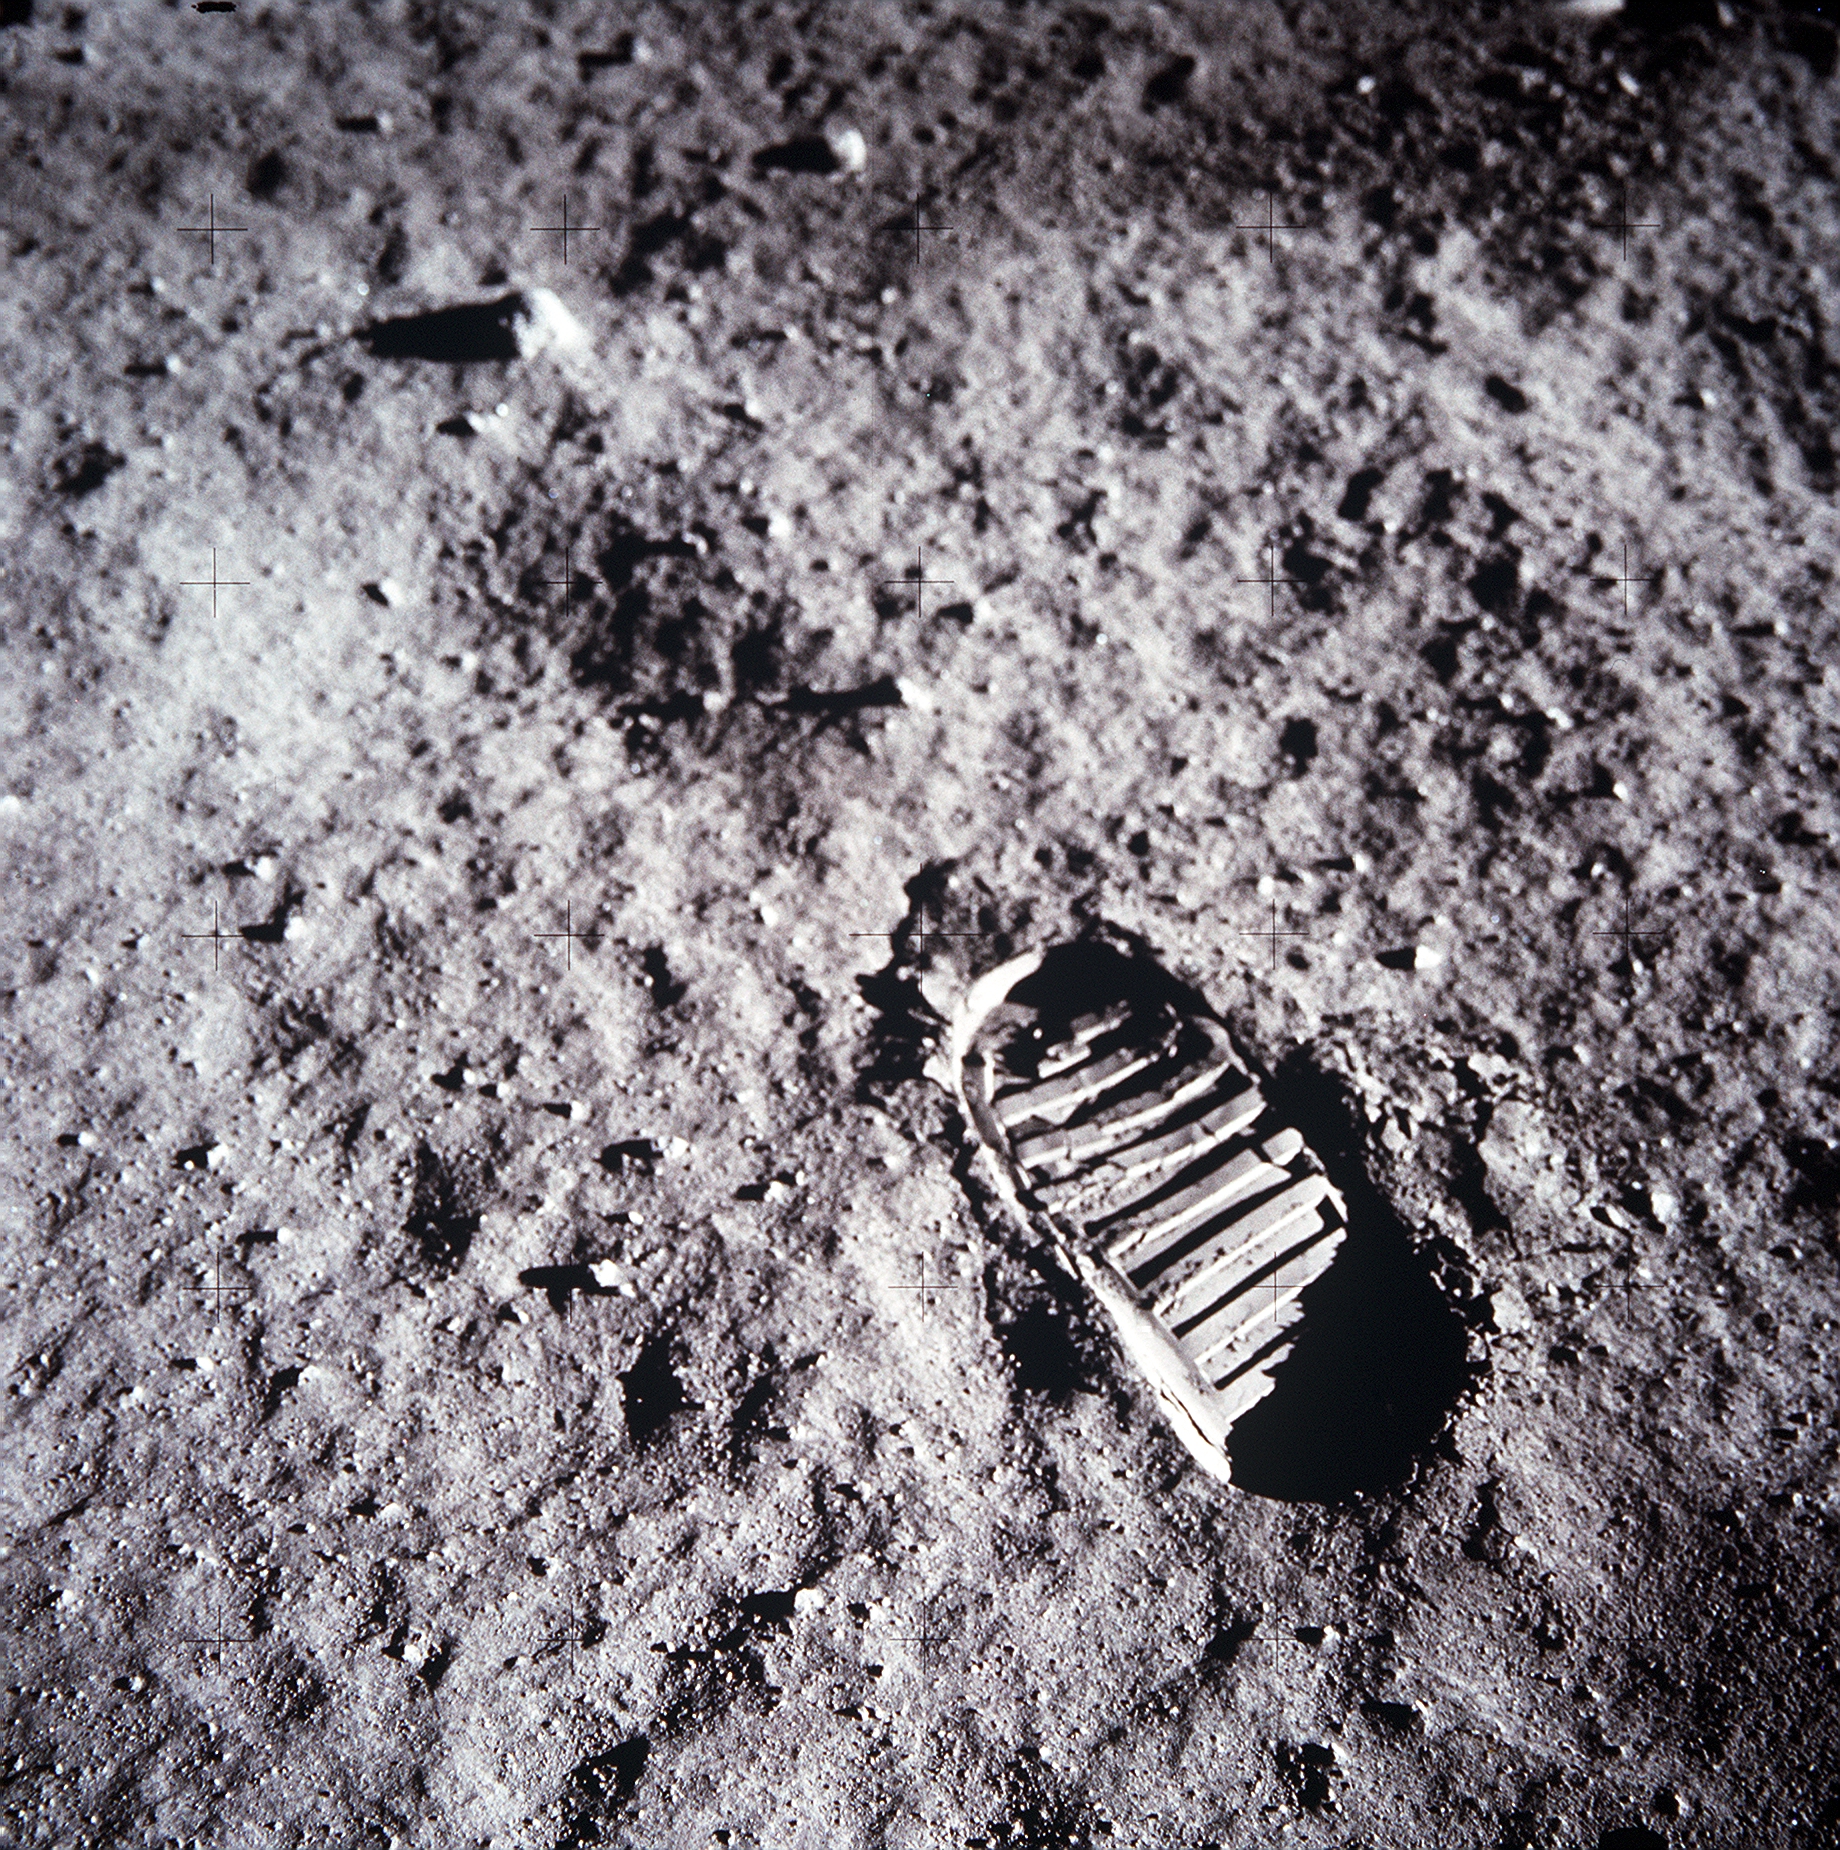 “That’s One Small Step for A Man…” Neil Alden Armstrong (1930-2012)